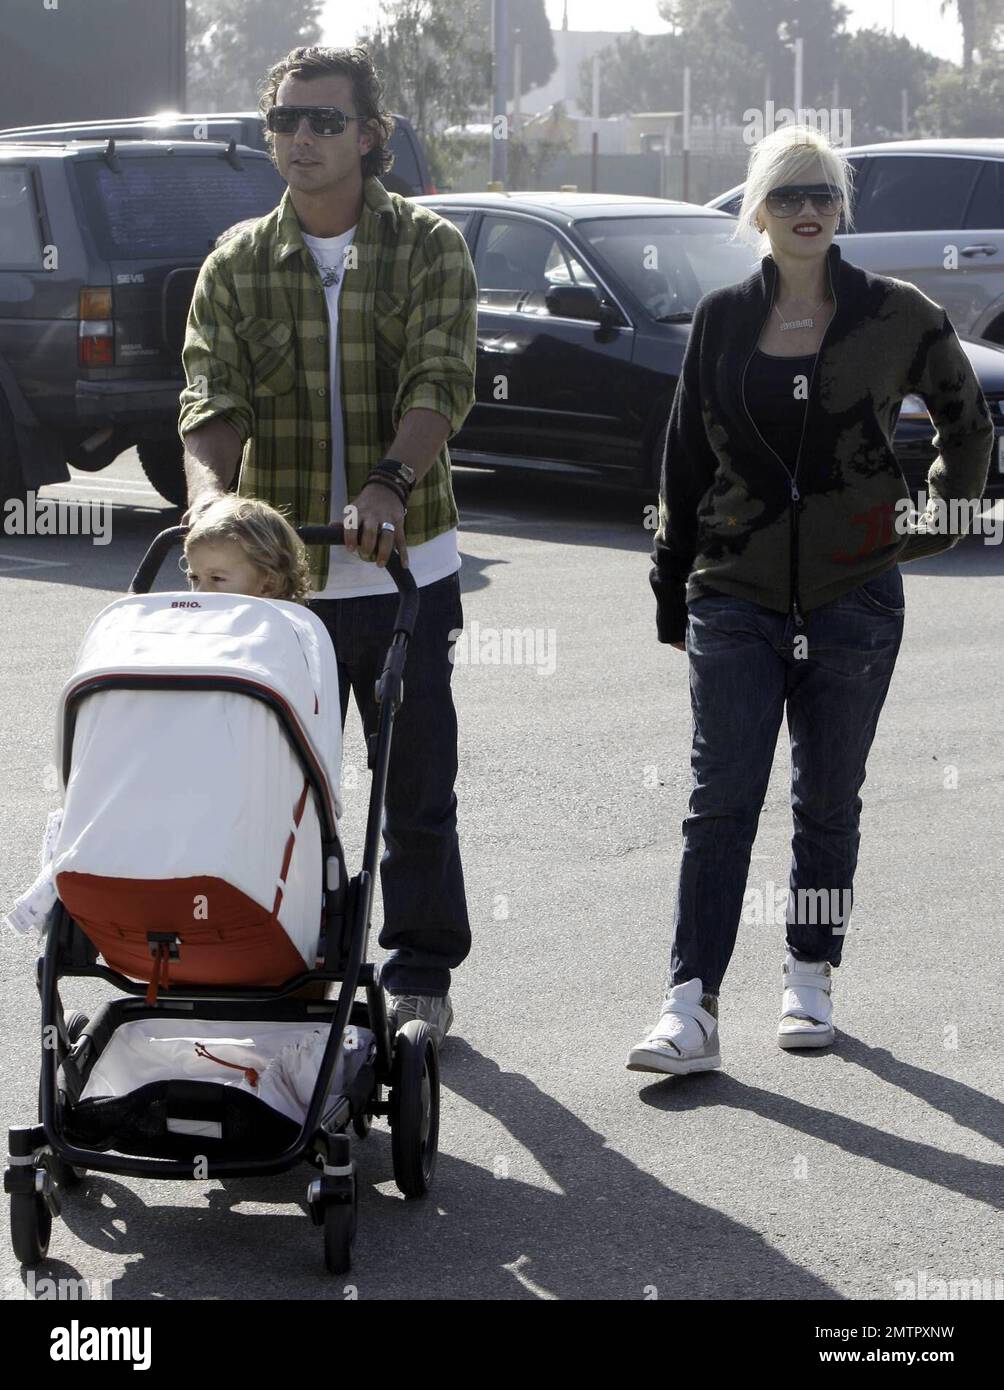 Gwen Stefani and Gavin Rossdale take sons Kingston and baby Zuma on a family shopping outing, stopping in at a local gourmet food store and at a Lakeshore Learning Materials store nearby. Little Zuma napped in his stroller while Kingston rode along, standing on a platform attached to the back. After shopping at Lakeshore, Gavin pushed a cart overflowing with bags of goodies from Lakeshore as Gwen took care of getting the kids back to the car. Los Angeles, CA. 11/29/08. Stock Photo